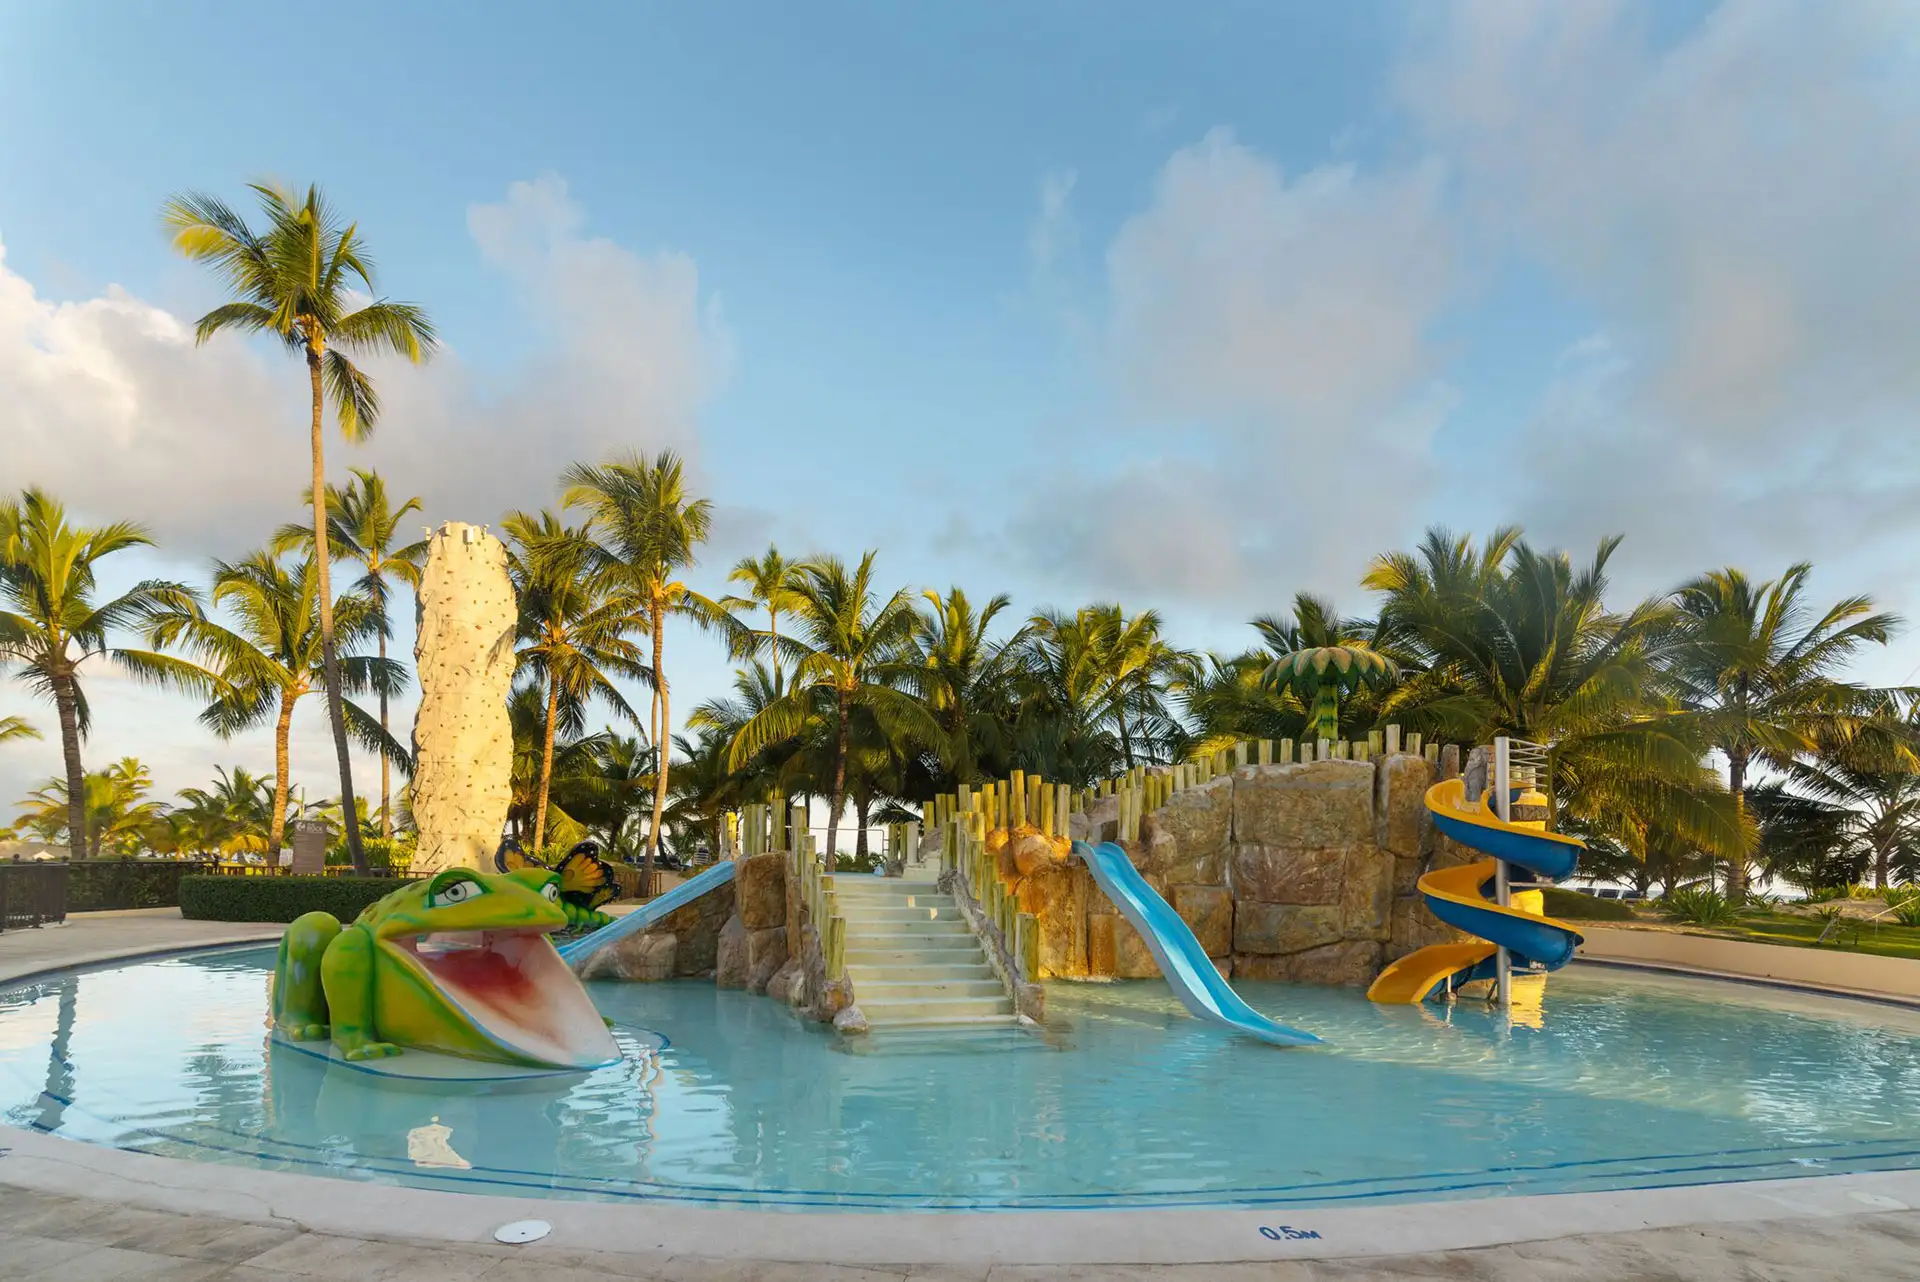 Water slides and pool at Occidental Caribe